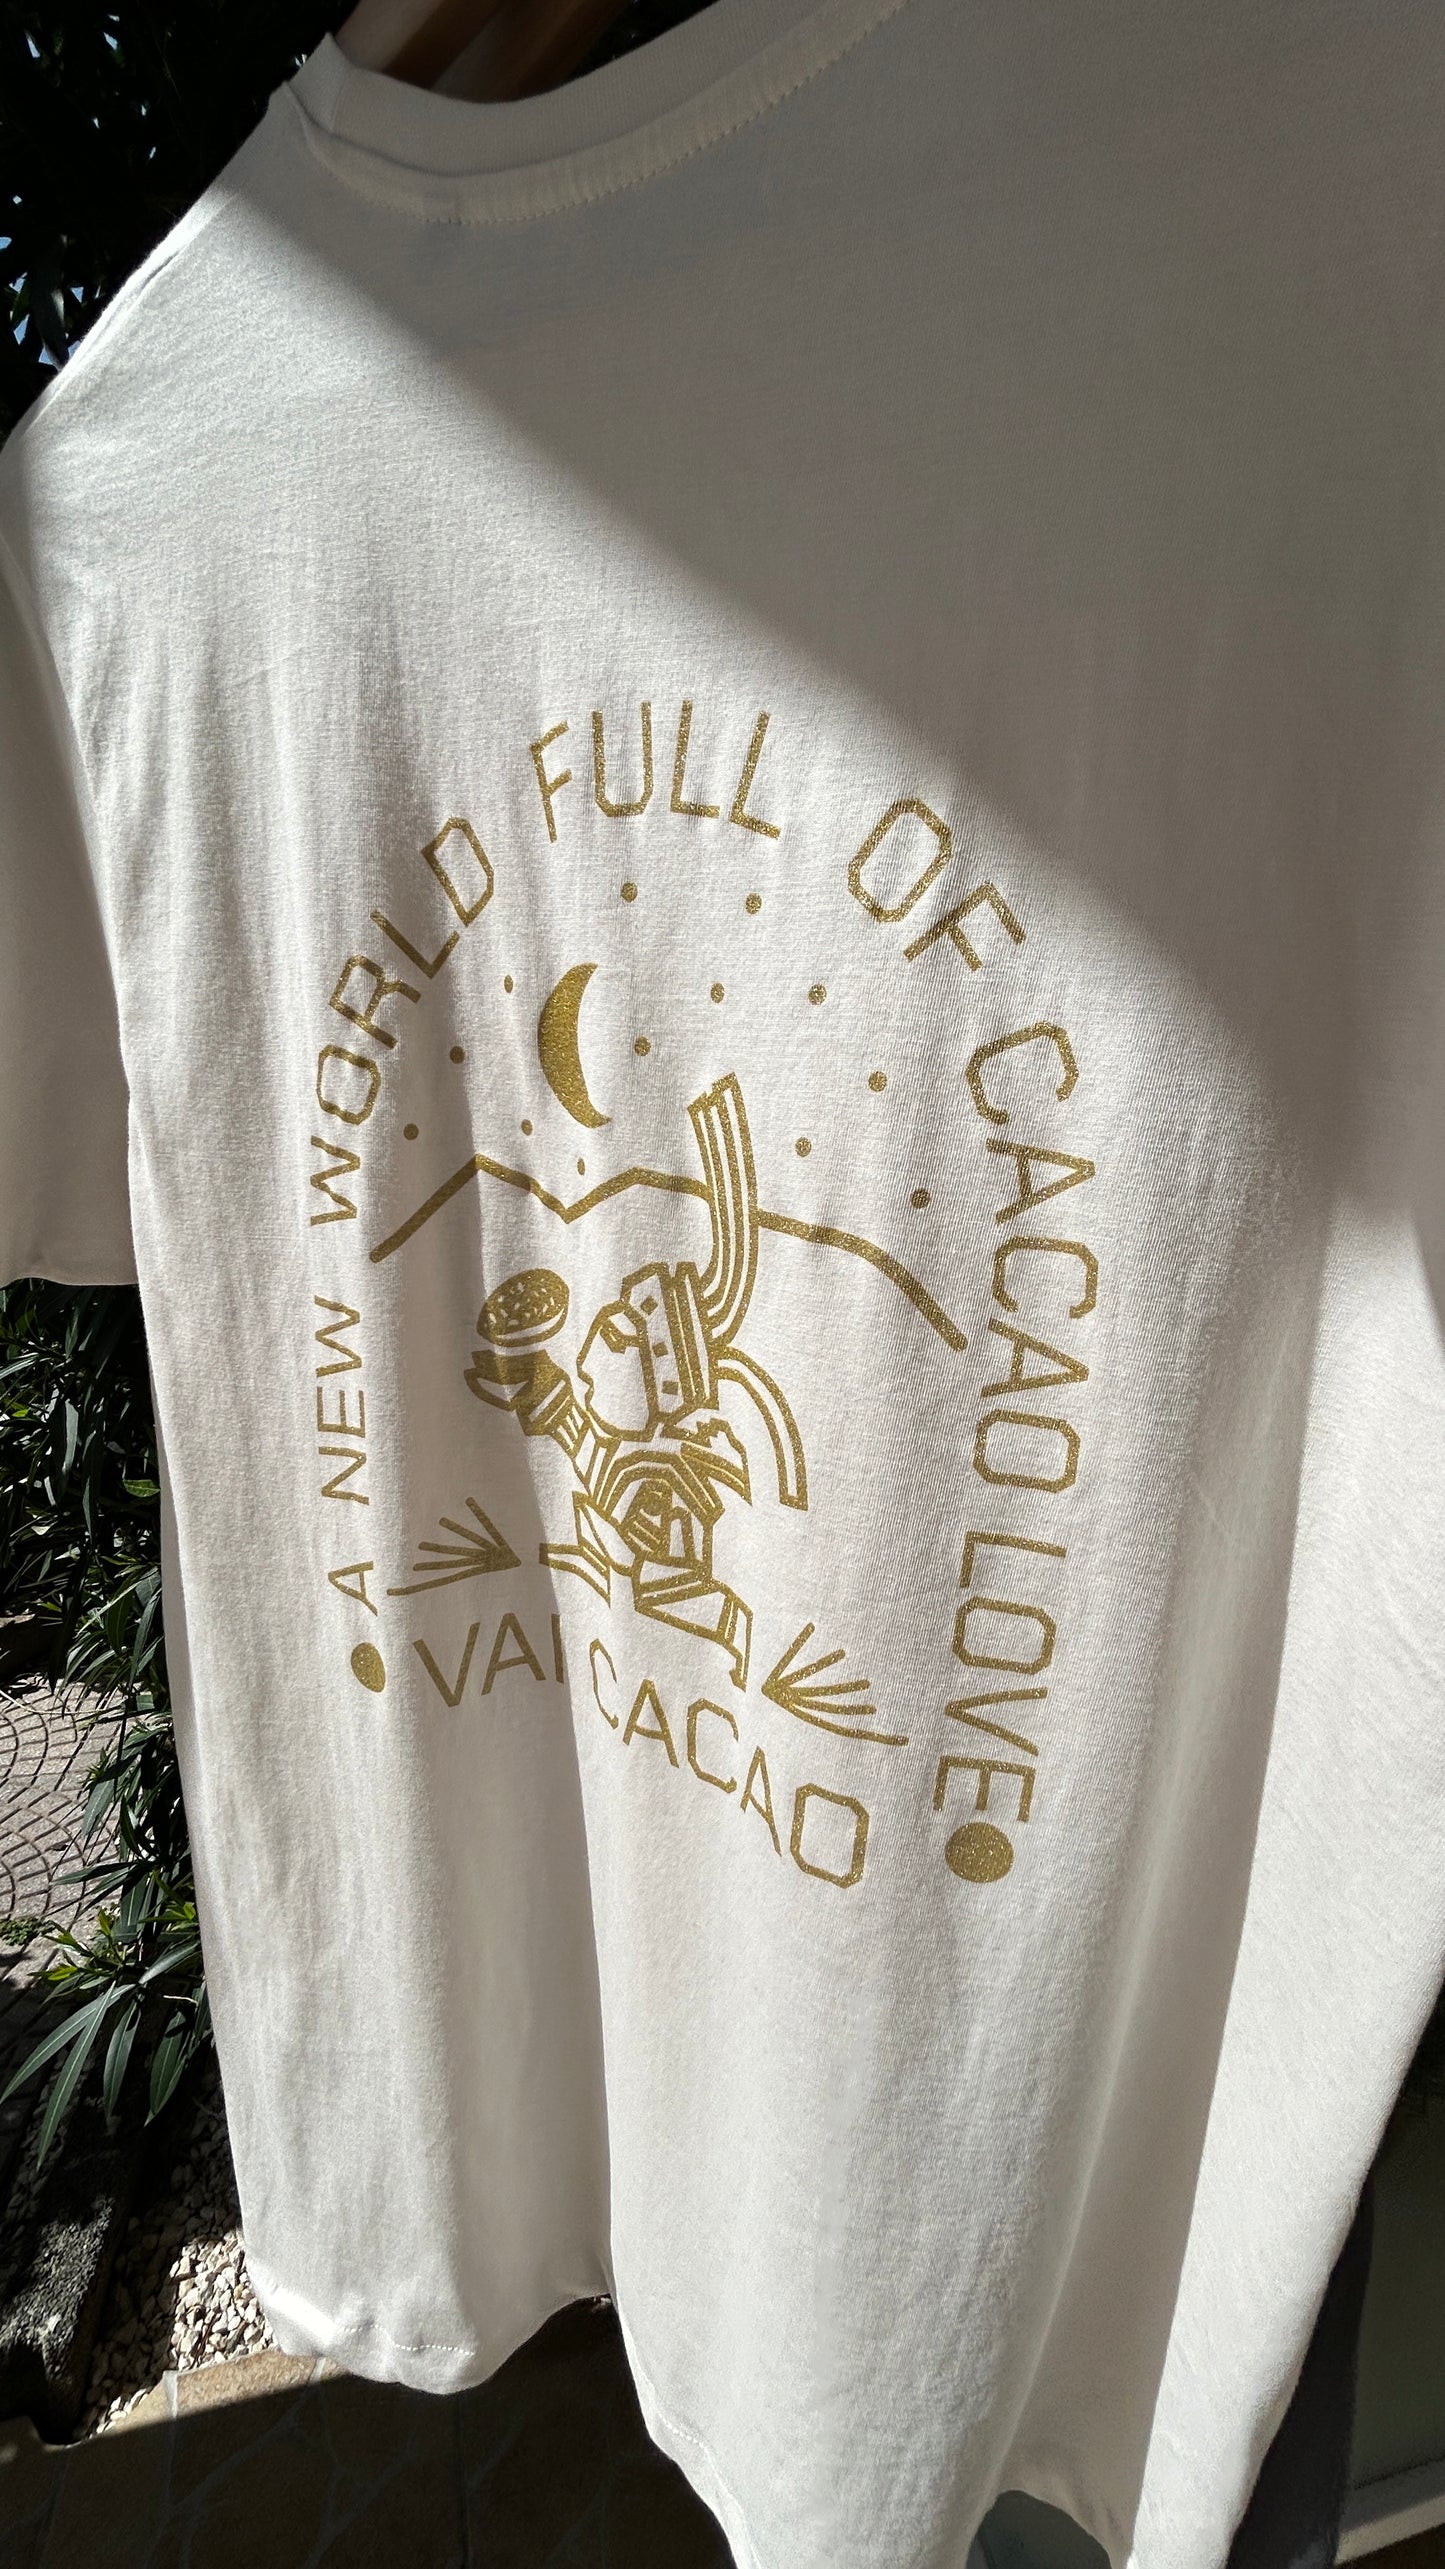 NEW! T-Shirts Vaicacao